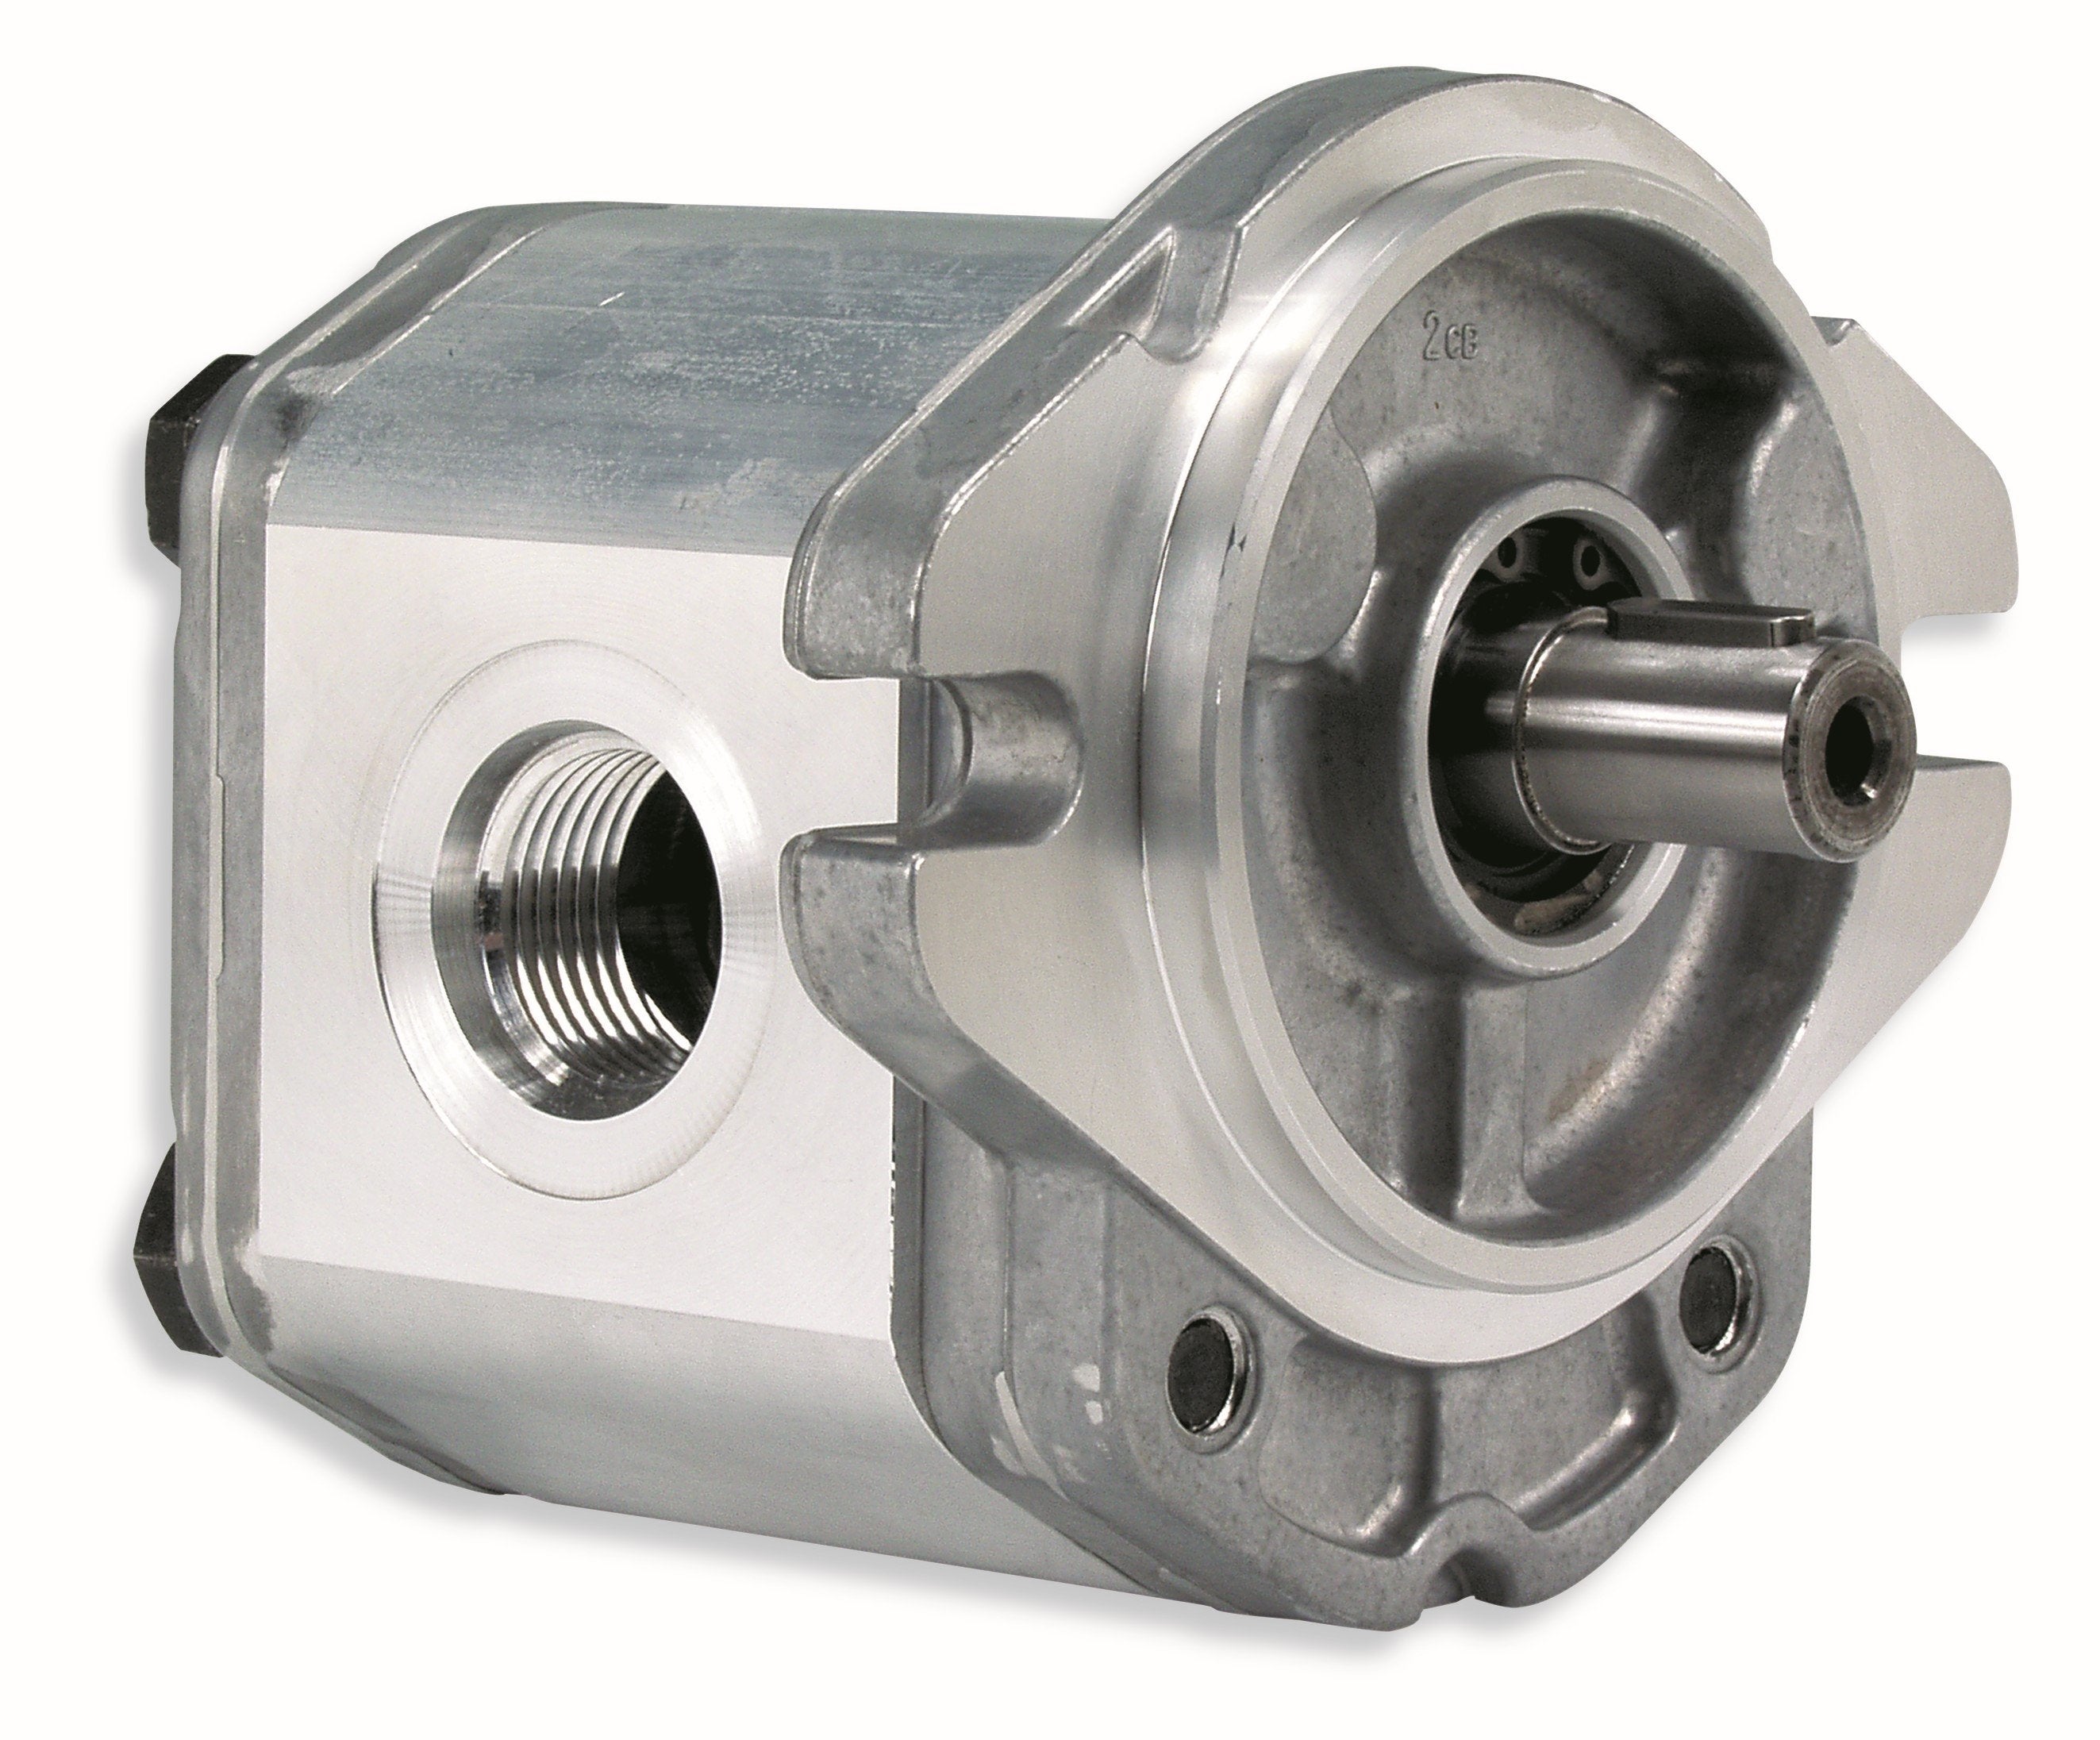 GHM1A-R-9-E2 : Marzocchi Gear Motor, Bidirectional, 6.2cc, 3770psi rated, 3000RPM, 0.5 (1/2") #8 SAE ports, 1/2" Bore x 1/8" Keyed Shaft